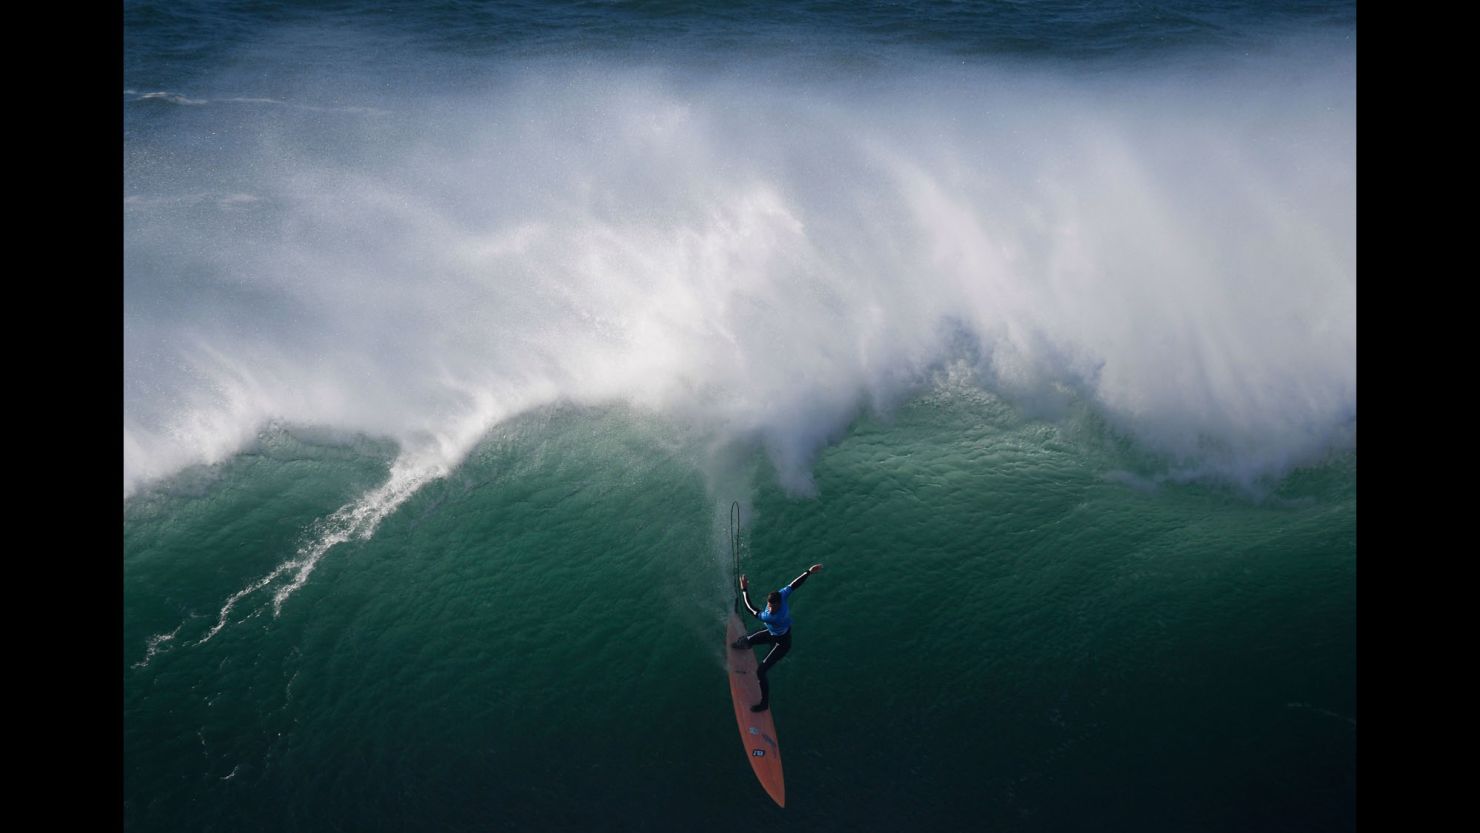 American big wave surfer Nic Lamb in competition in December of 2016.